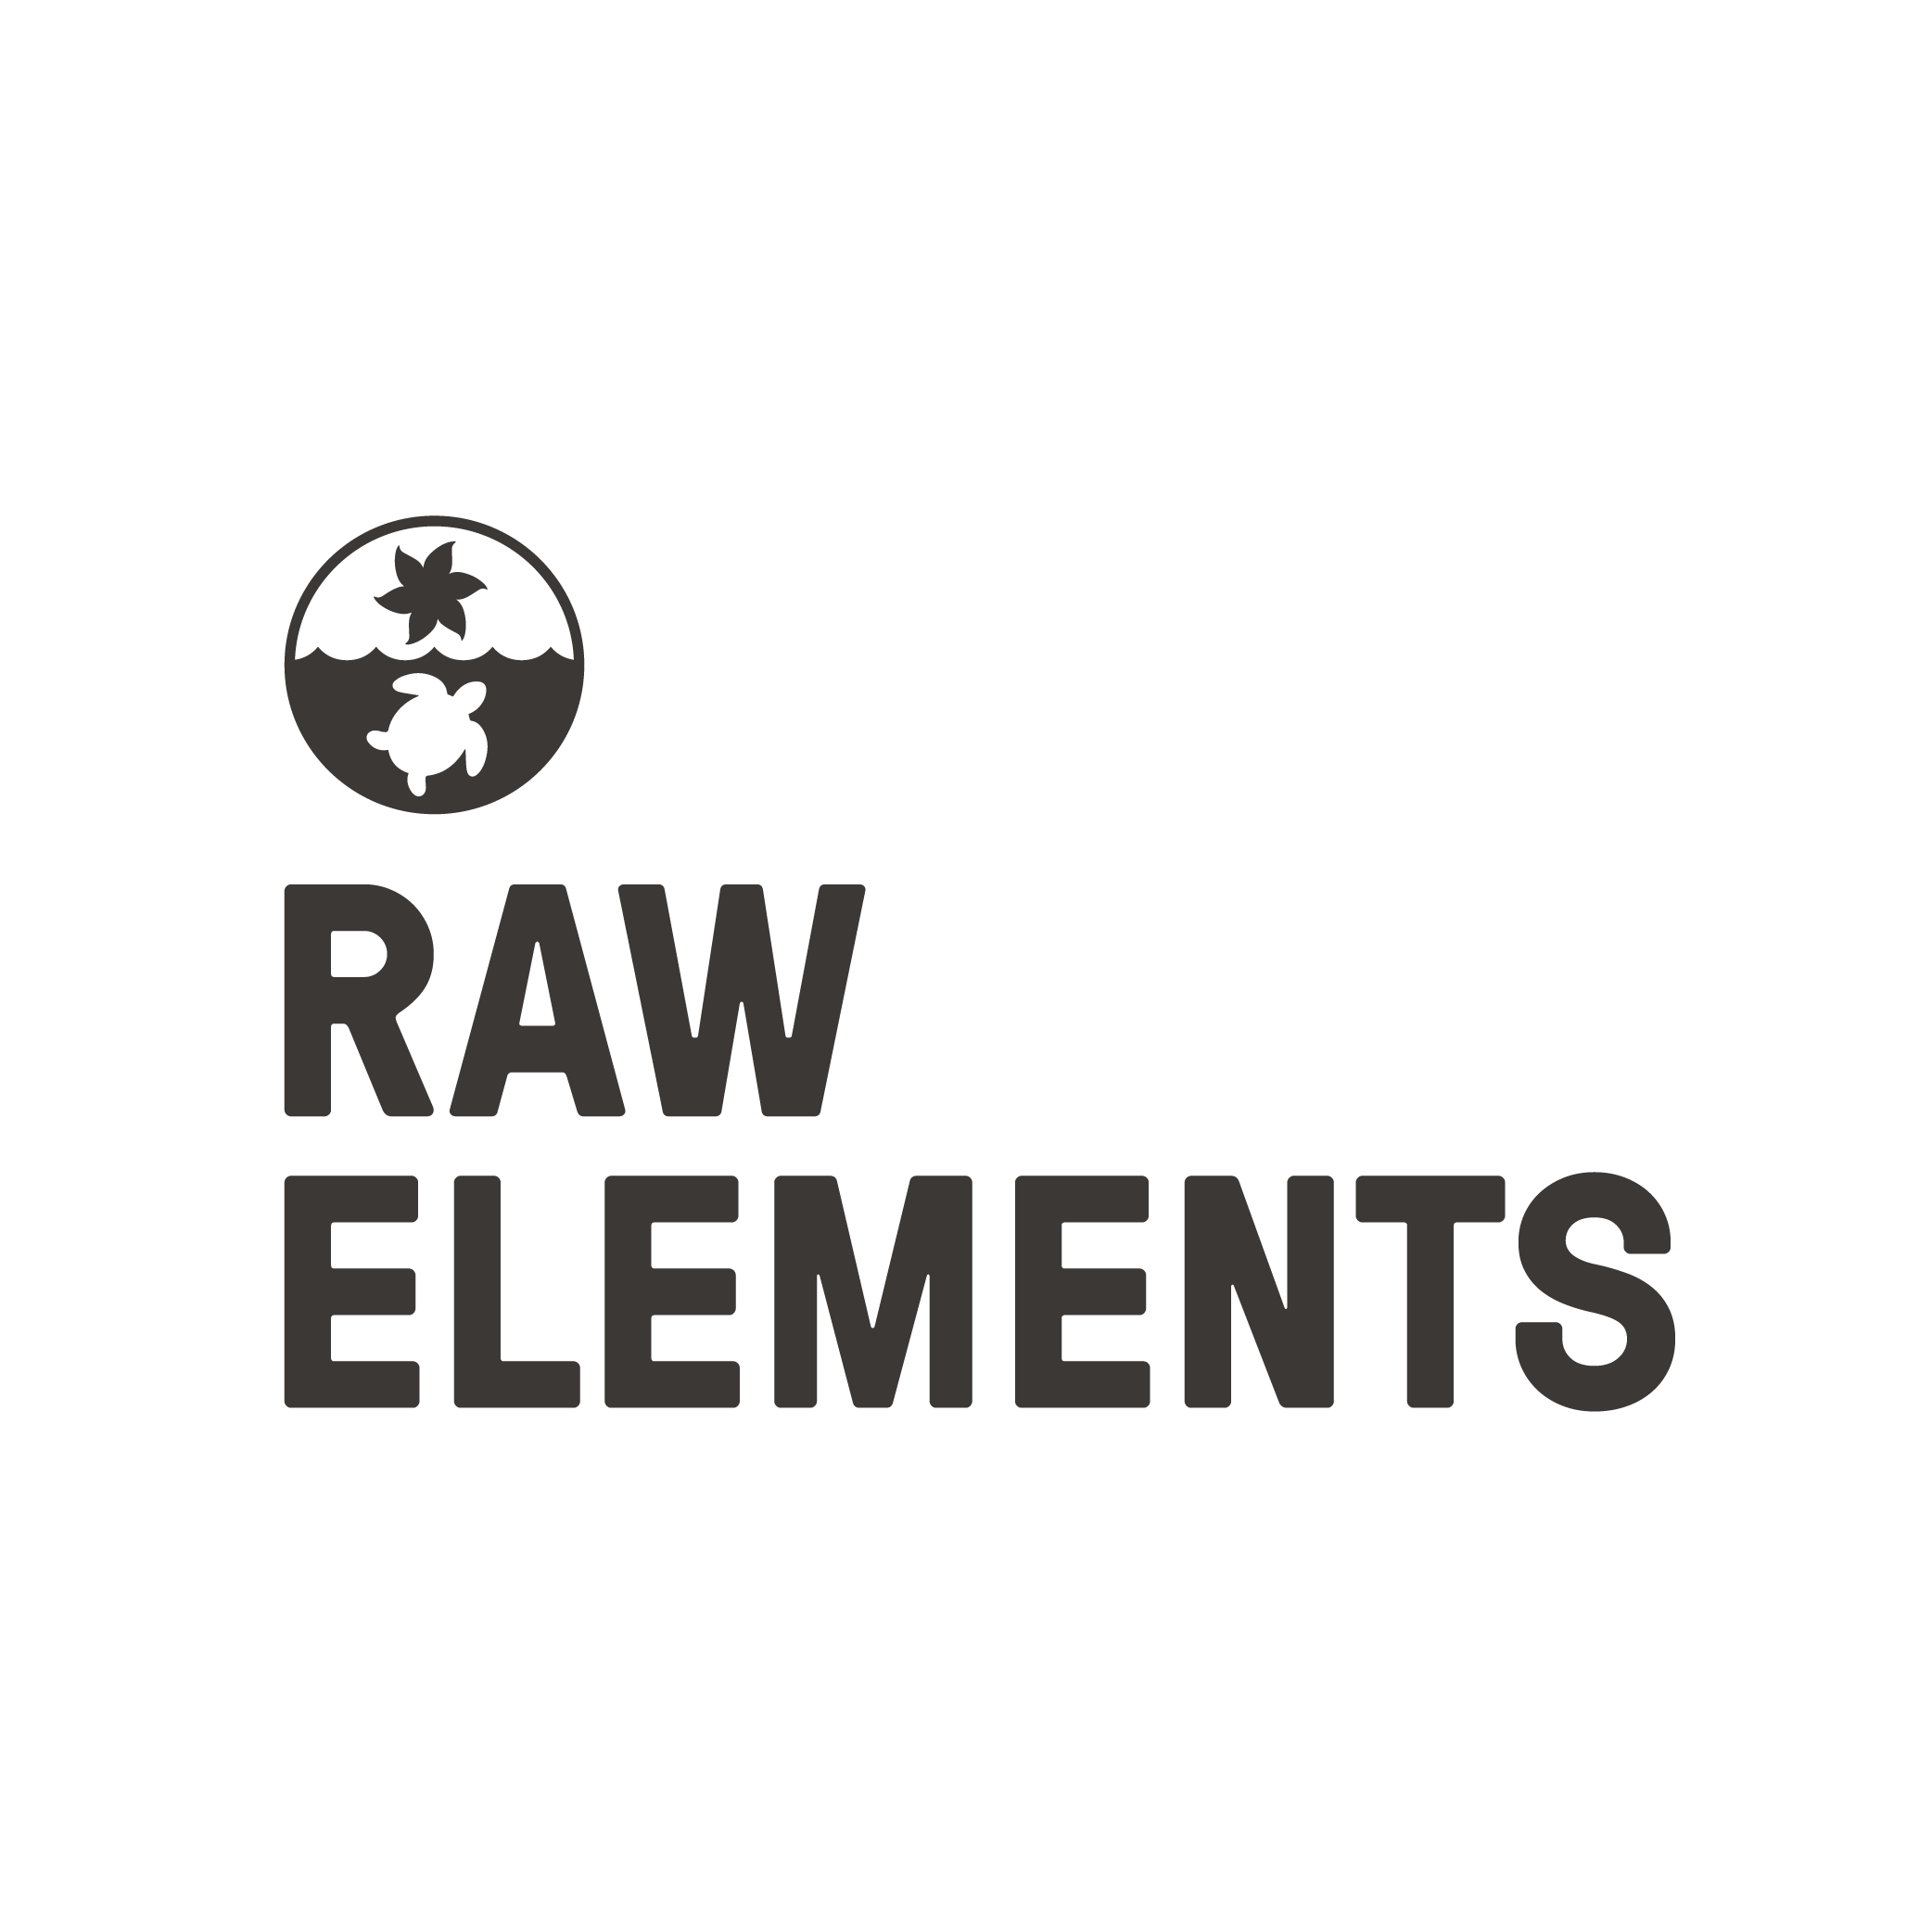 Raw Elements Square.png